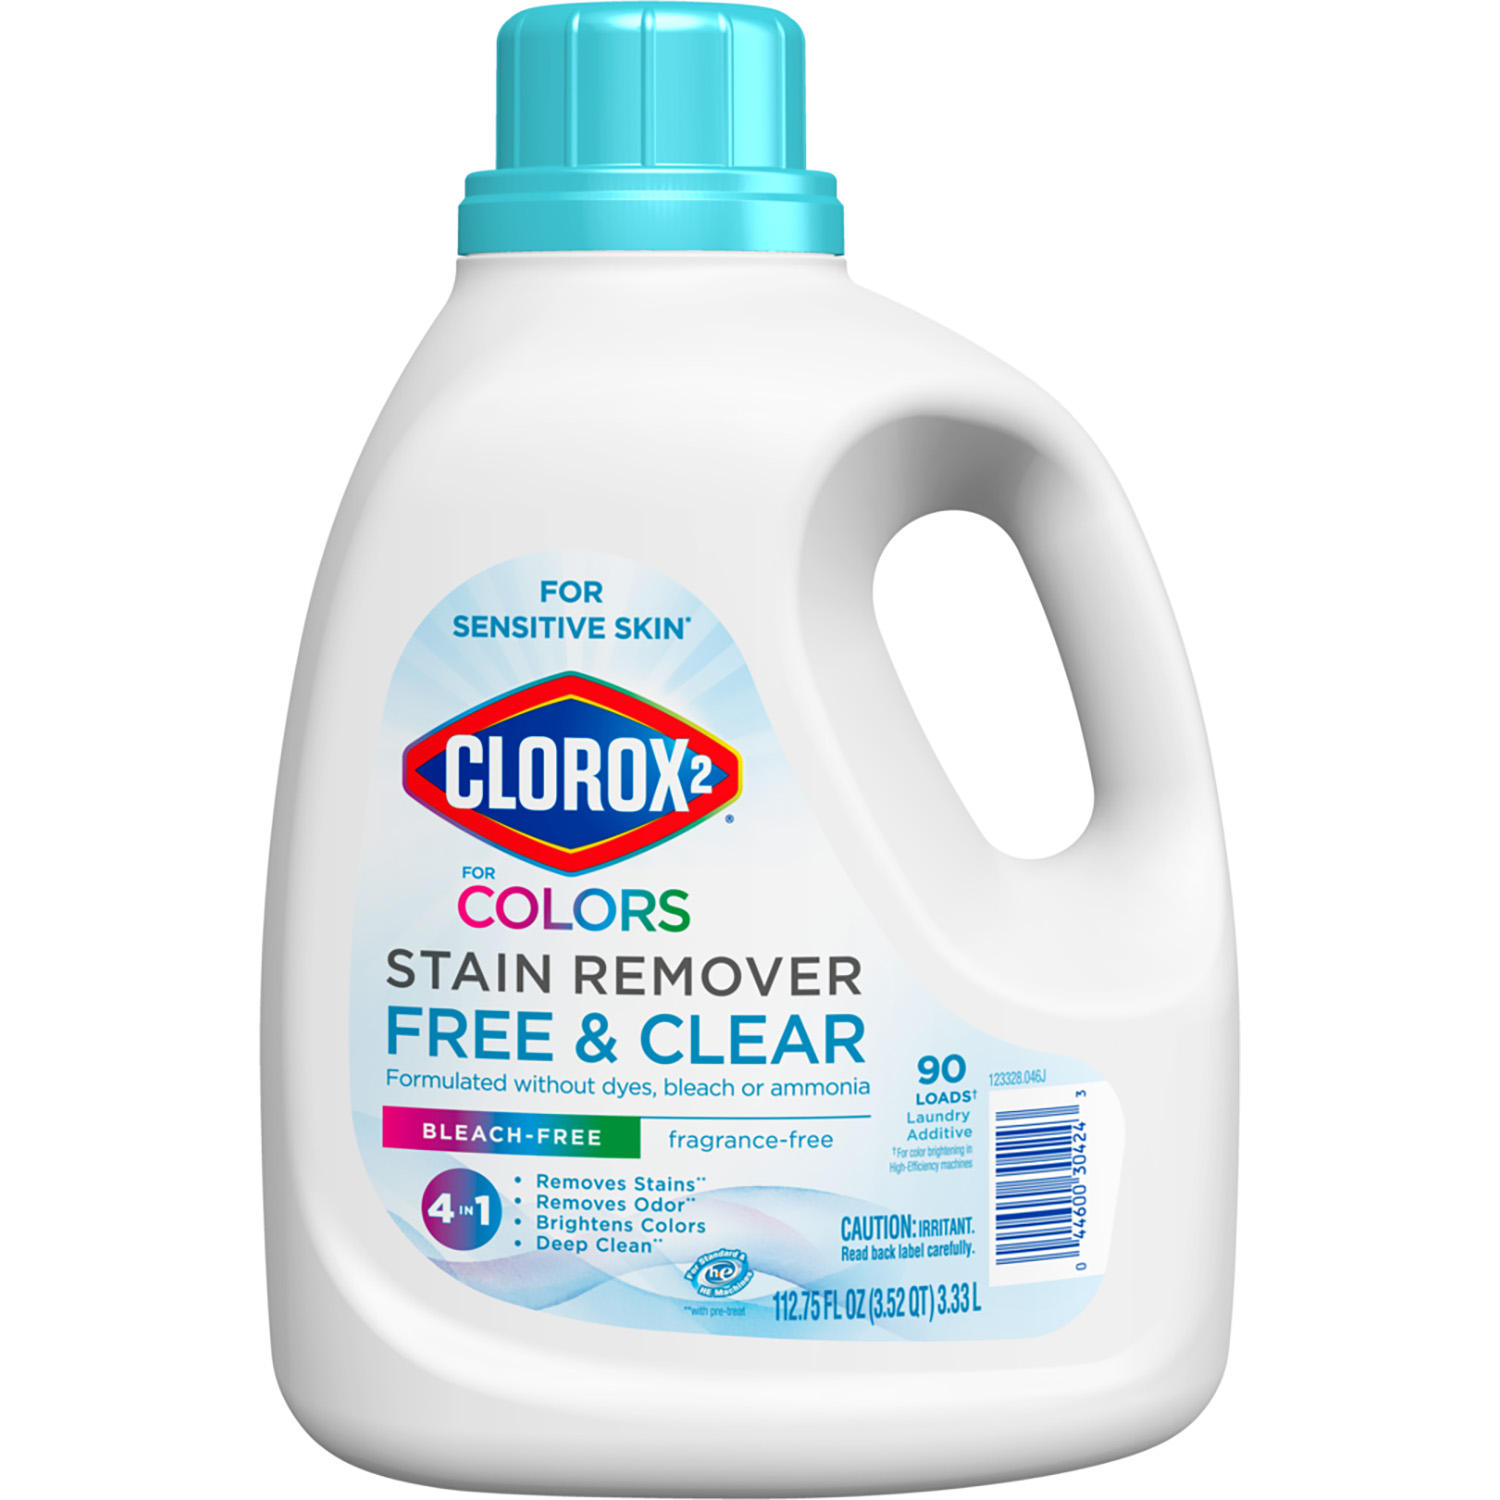 UPC 044600304243 product image for Clorox 2 for Colors Free & Clear Stain Remover + Color Brightener (112 fl. oz.) | upcitemdb.com